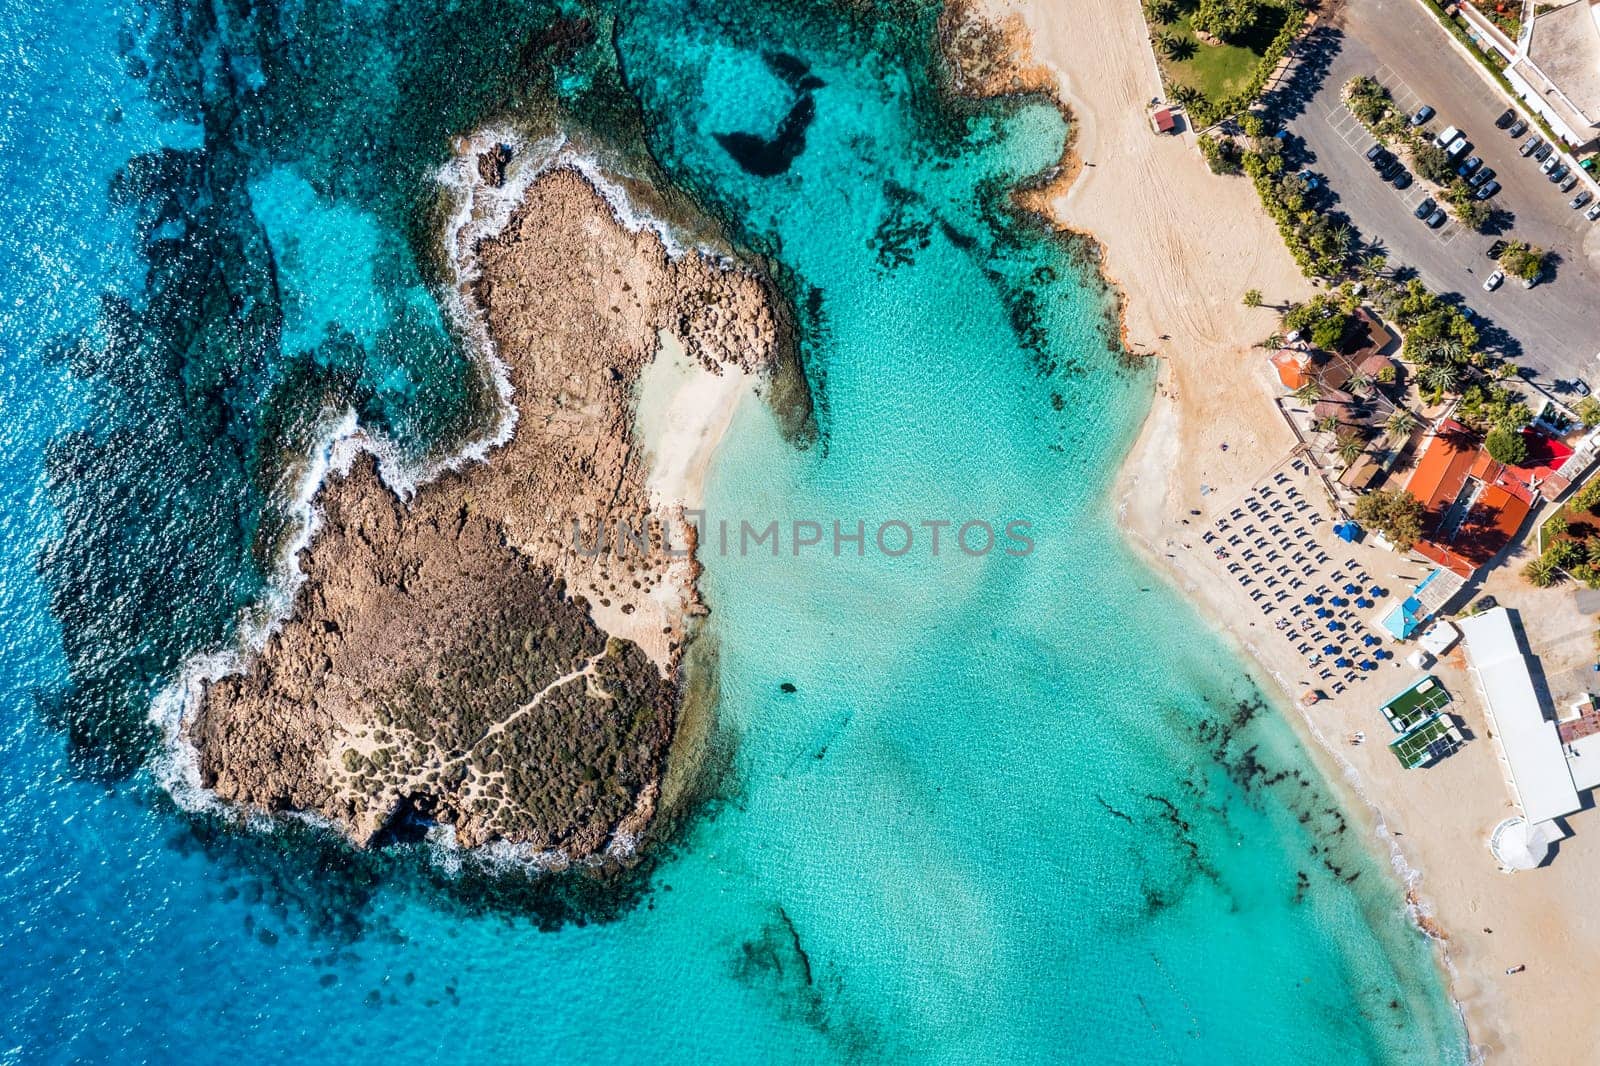 Aerial view of beautiful Nissi beach in Ayia Napa, Cyprus. Nissi beach in Ayia Napa famous tourist beach in Cyprus. A view of a azzure water and Nissi beach in Aiya Napa, Cyprus. by DaLiu